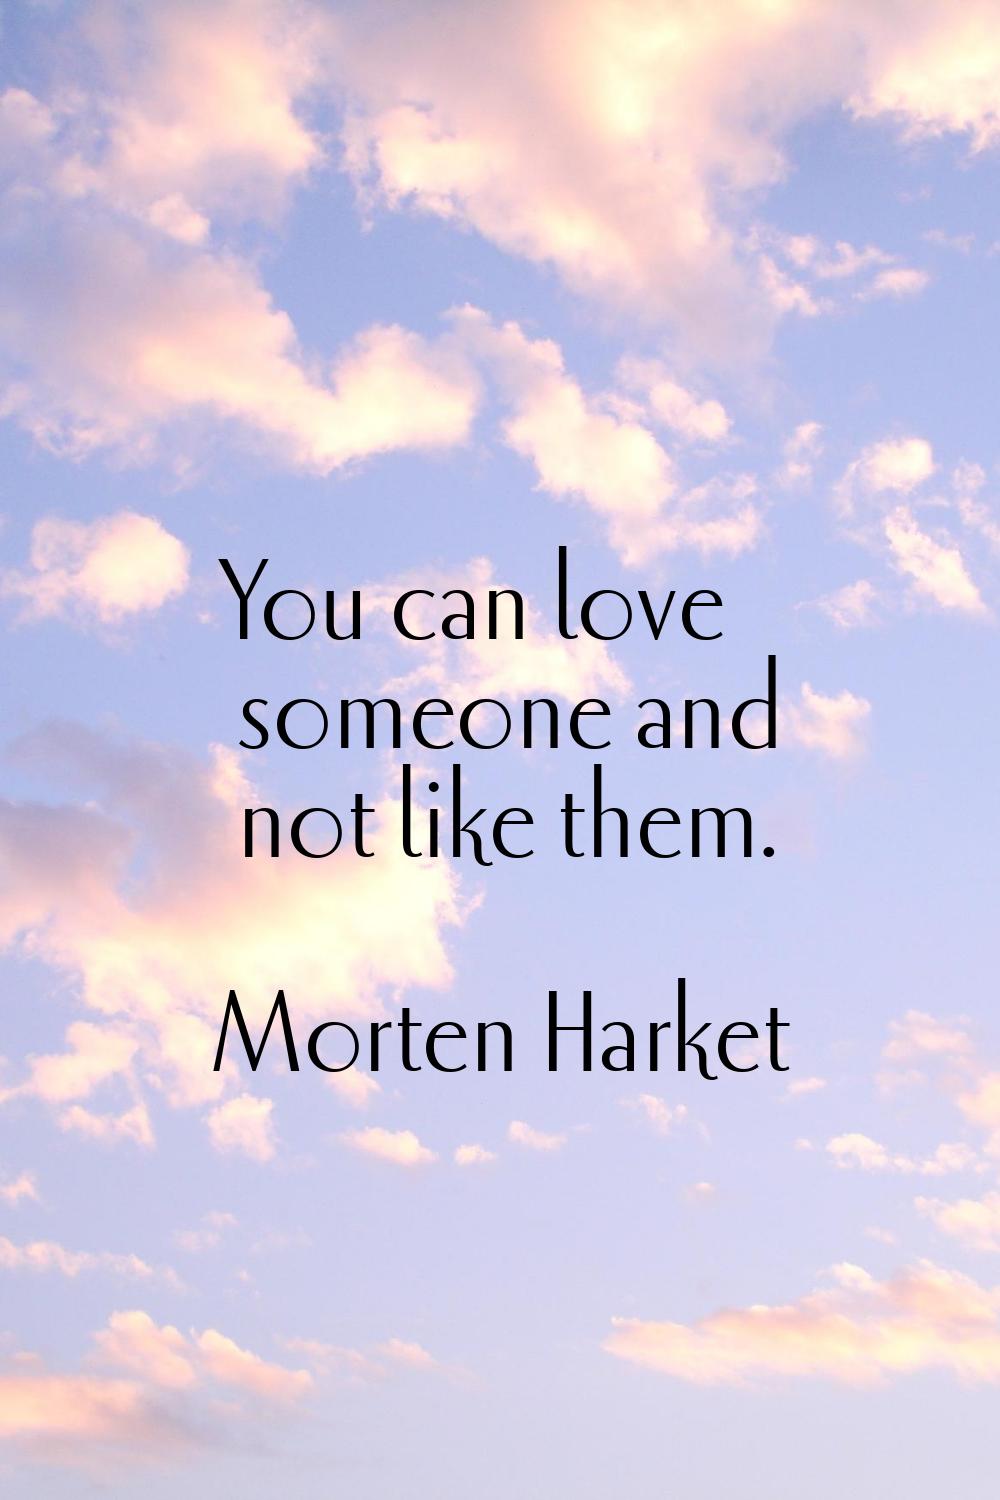 You can love someone and not like them.